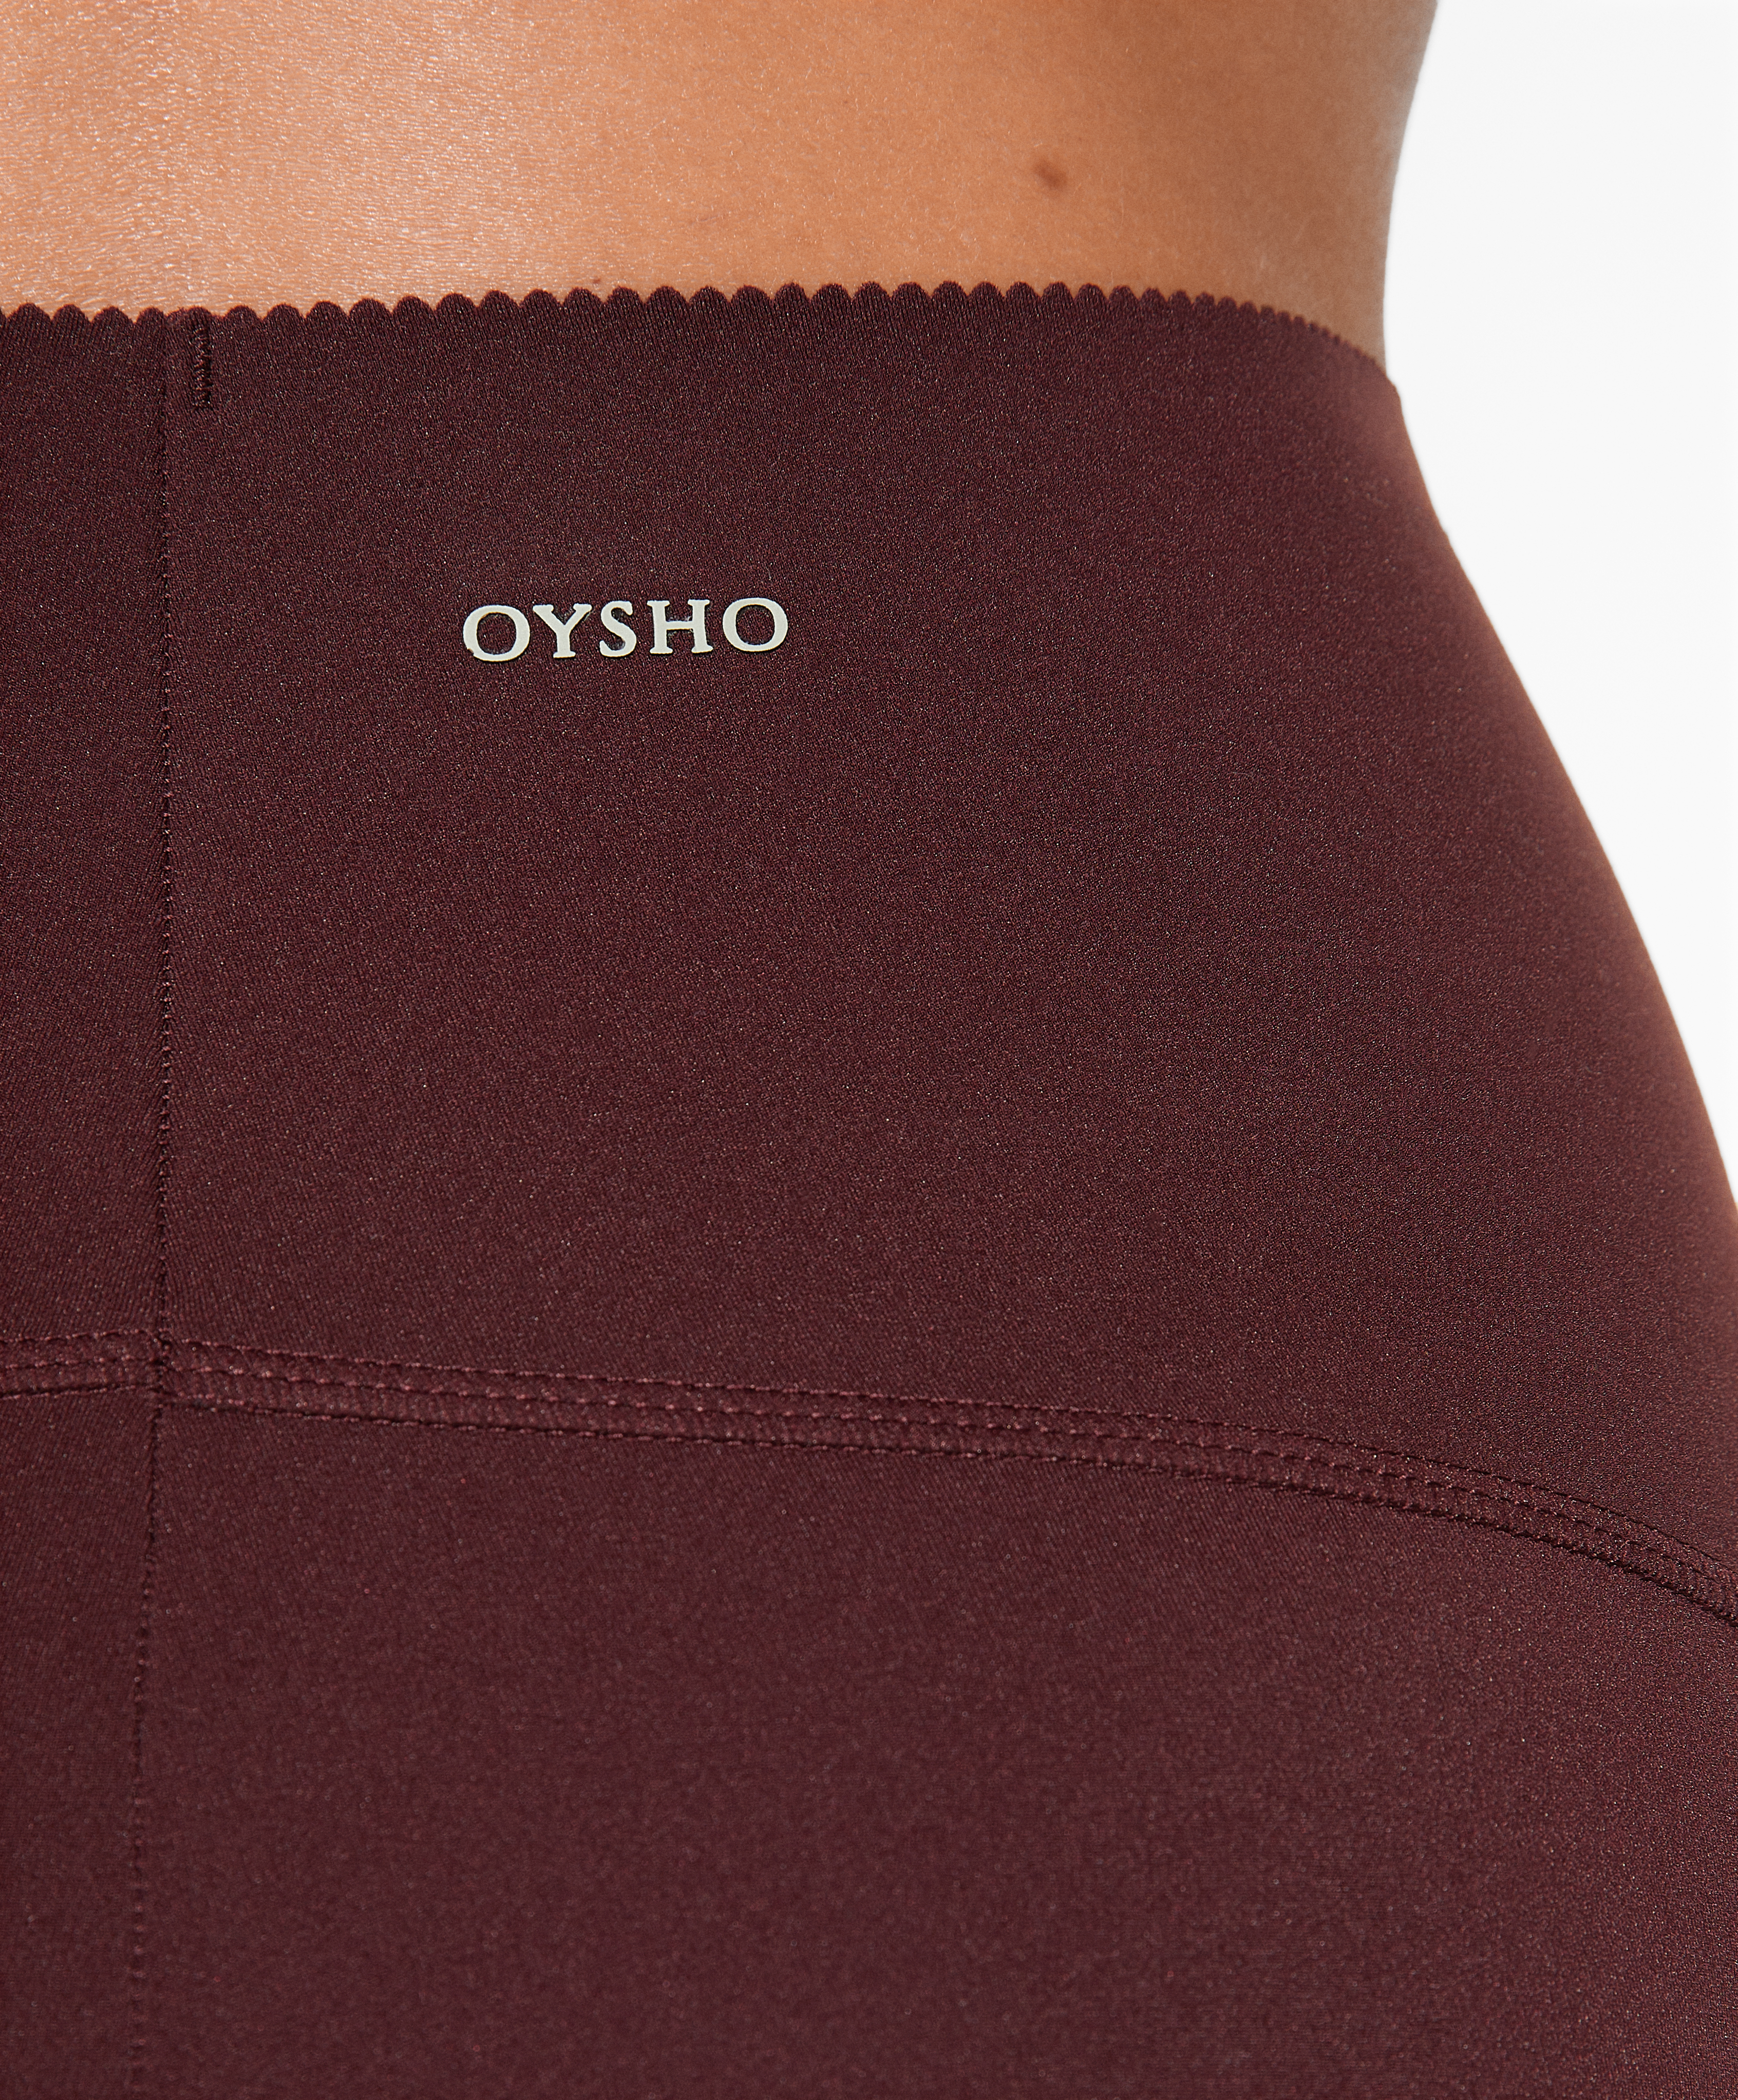 New oysho legging available in brown & Black Size S M L Dm for